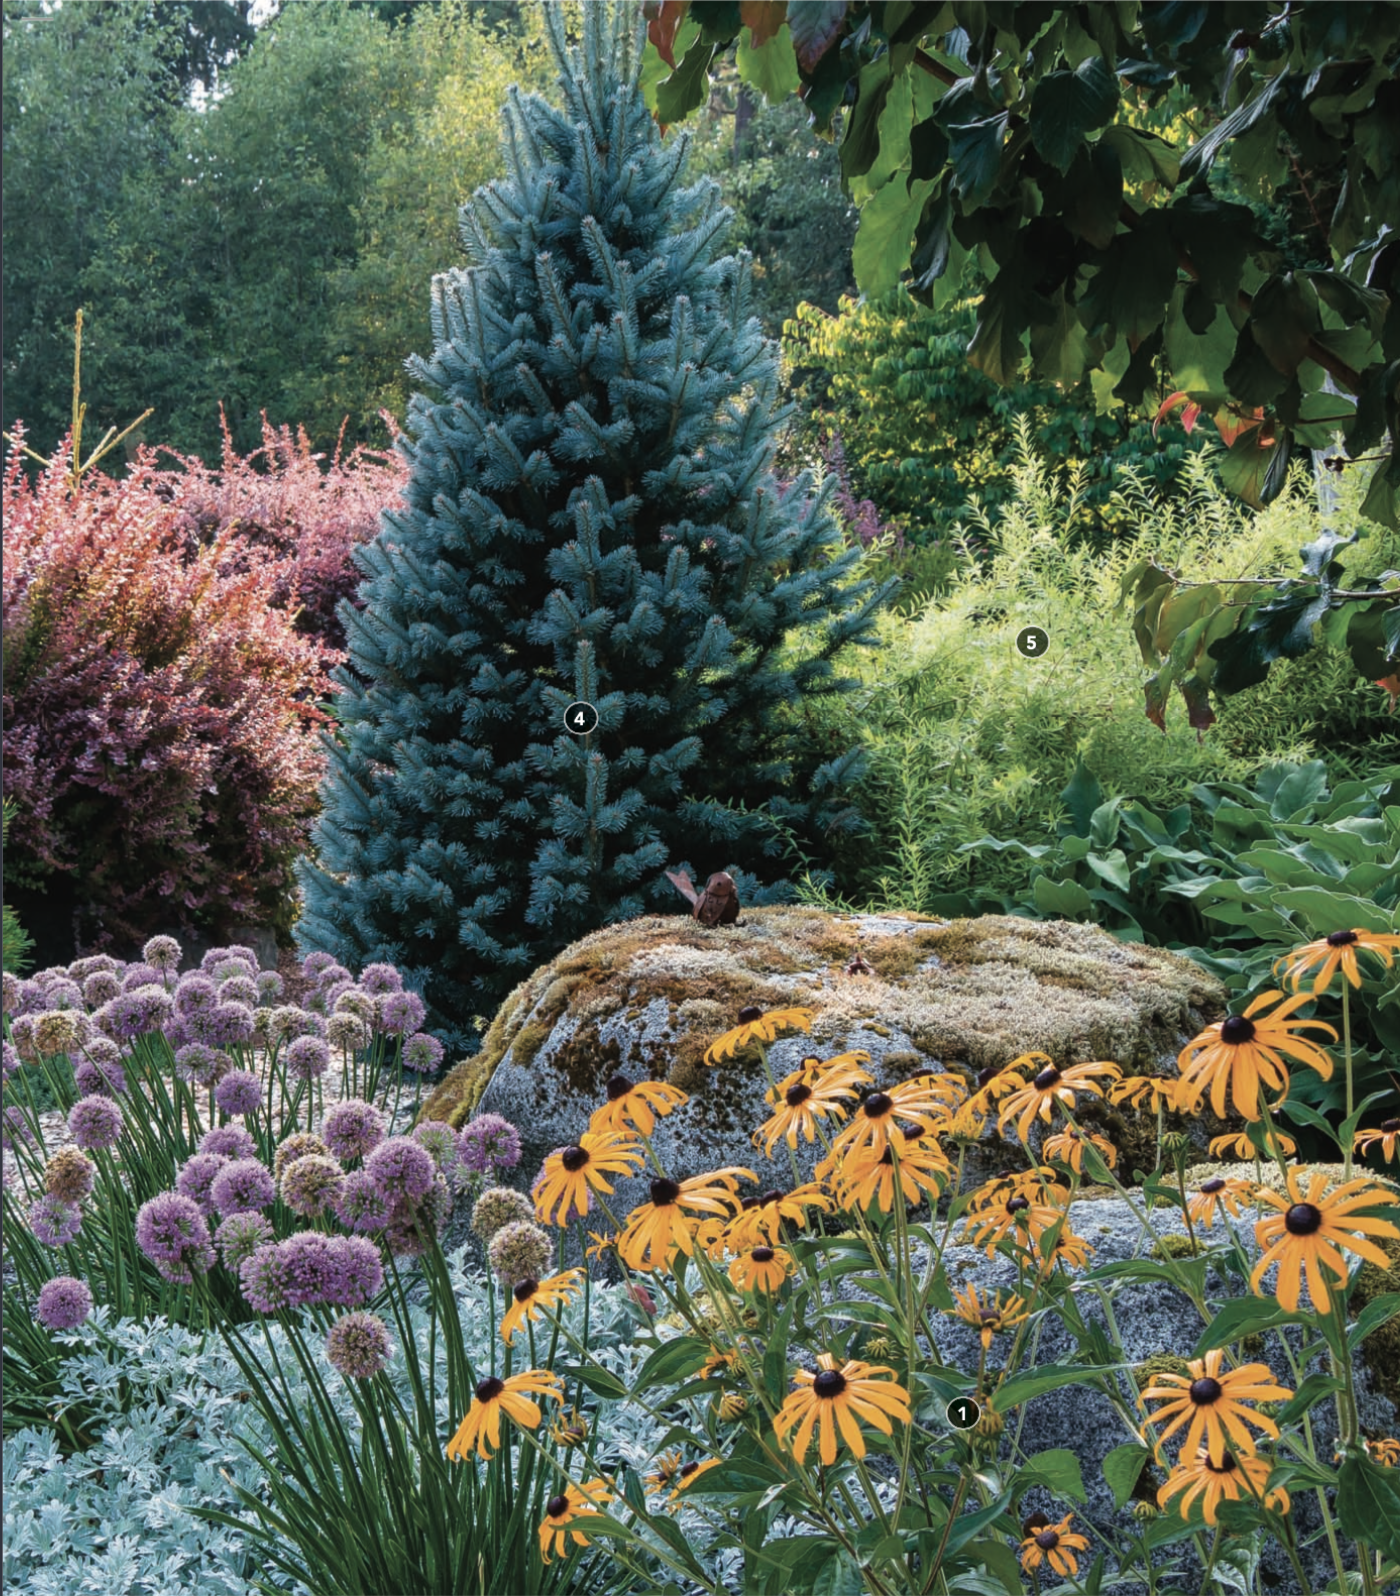 Evergreen conifers jostle with deciduous shrubs, perennials, and flowering bulbs in an inspiring medley of textures and color.